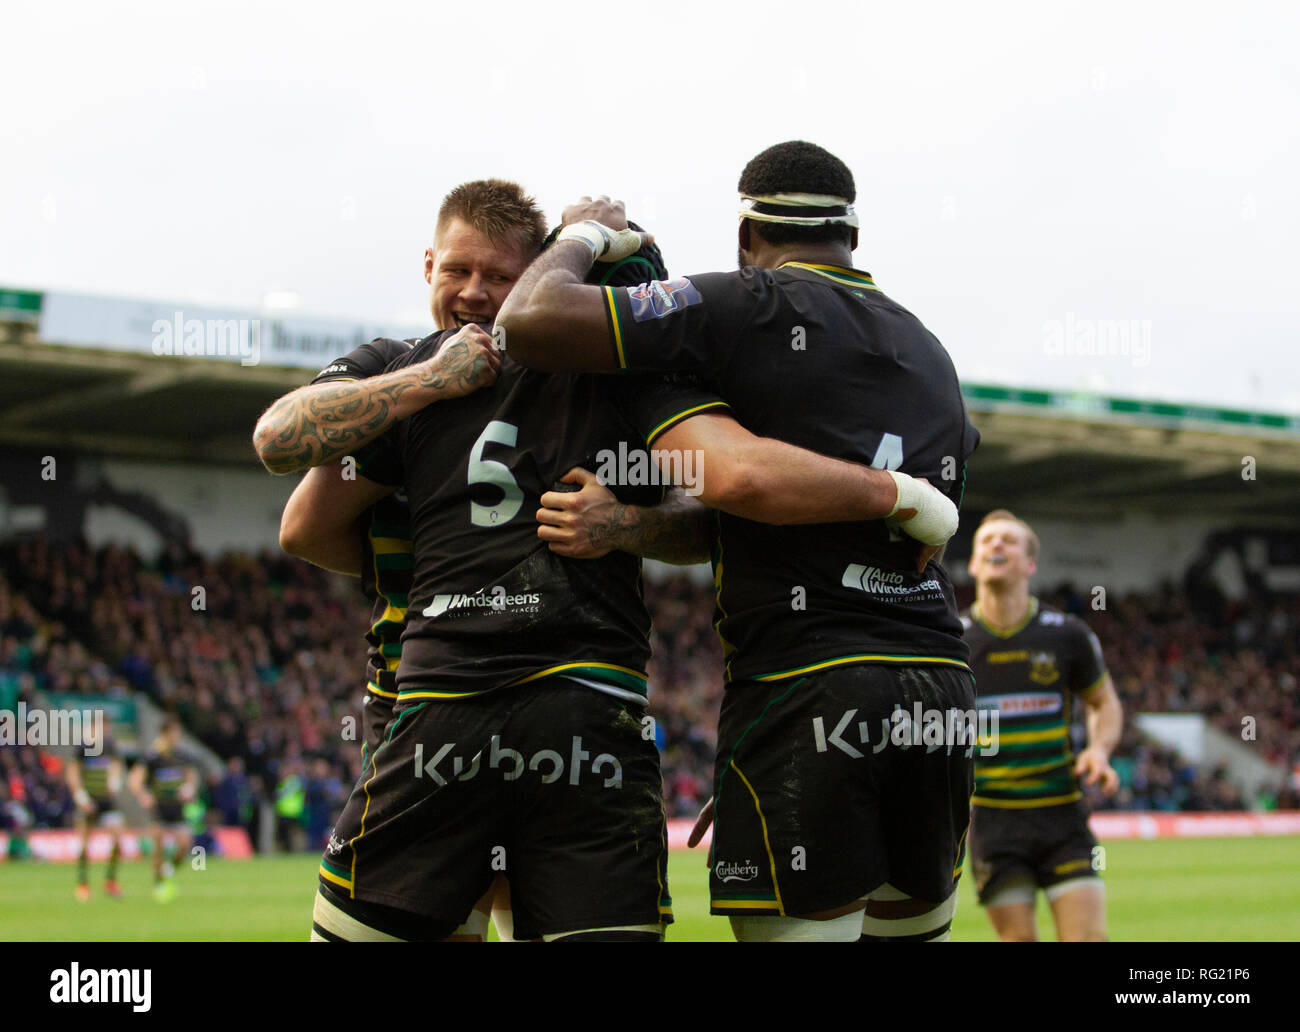 Northampton, UK. 26th January 2019. Teimana Harrison, Dominic Barrow and Api Ratuniyarawa celebrate of Northampton Saints celebrate a try during the Premiership Rugby Cup match between Northampton Saints and Leicester Tigers. Andrew Taylor/Alamy Live News Stock Photo